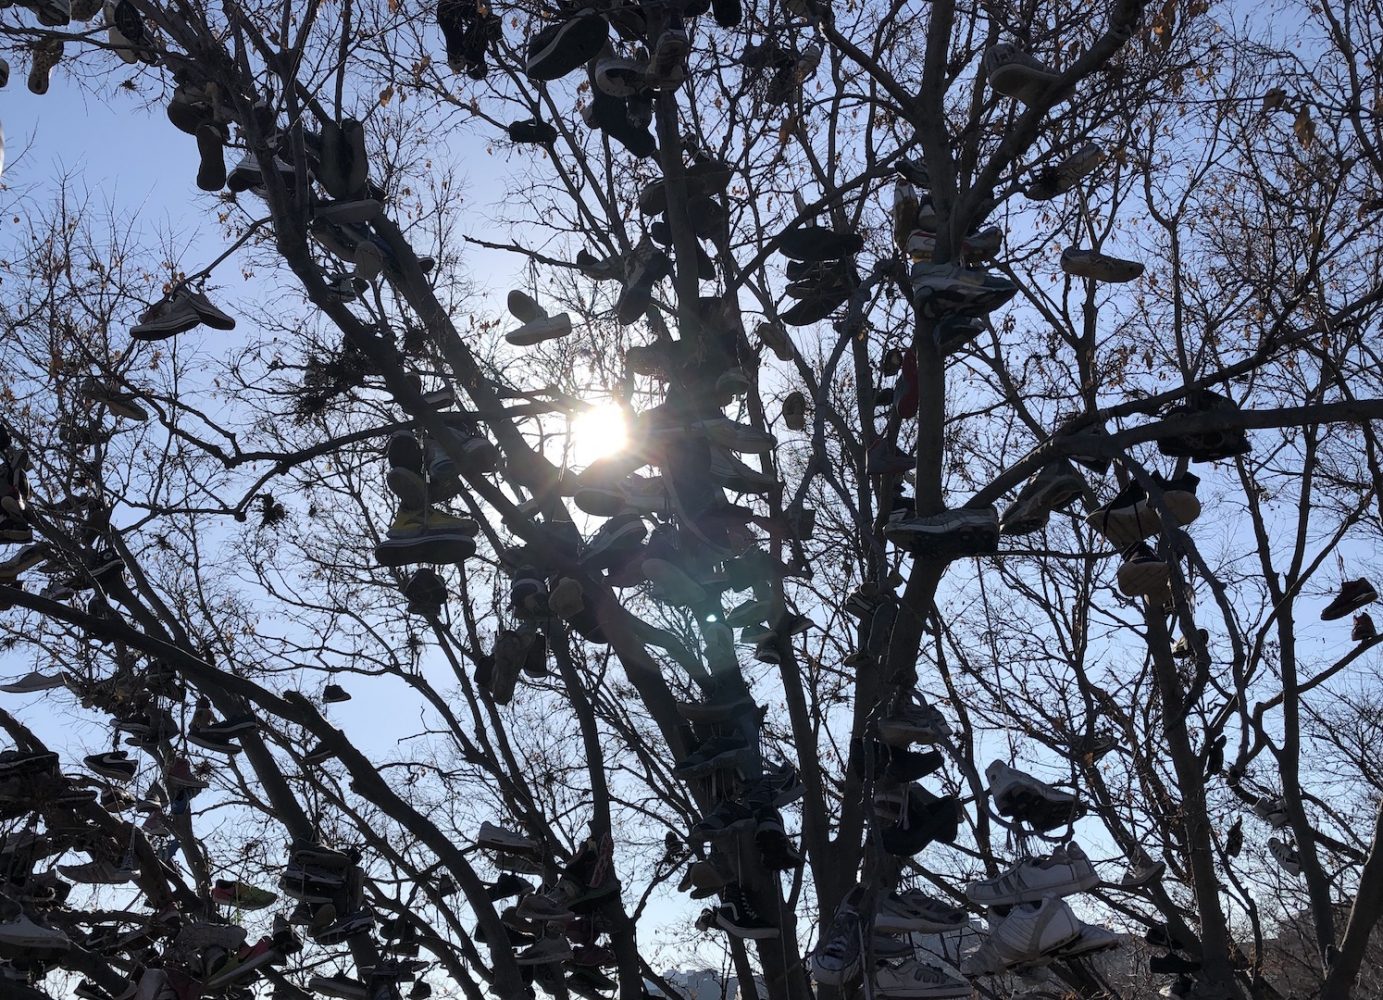 Silhouette of tree branches filled with shoes with the sun shining through the branches.